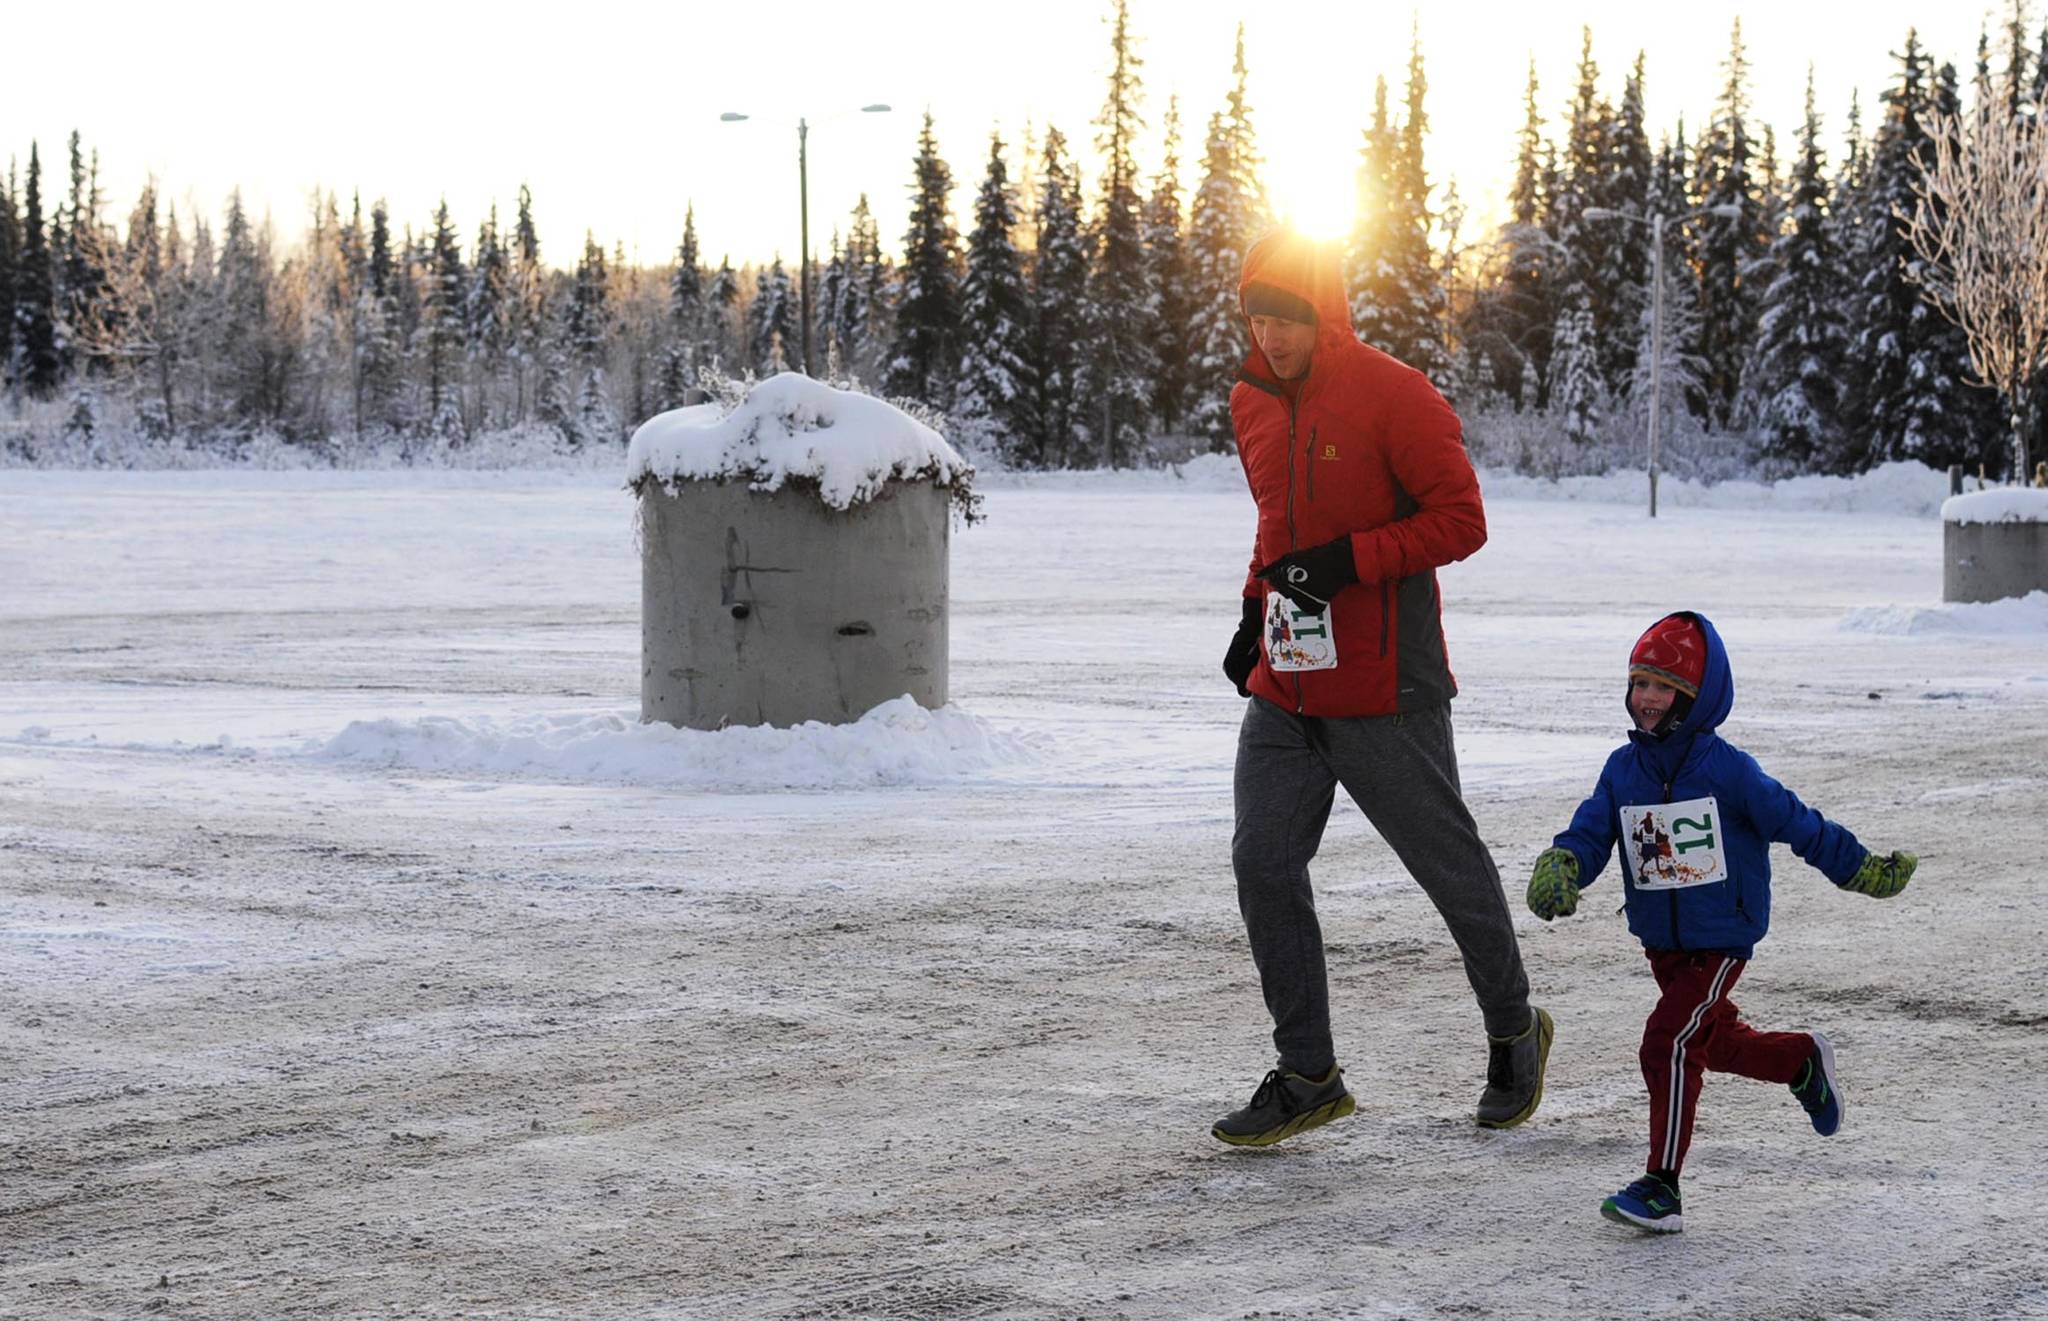 Adam Reimer and his son Gus Reimer, 4, finish the 1-mile Turkey Trot race at the Soldotna Regional Sports Complex on Thursday, Nov. 23, 2017 in Soldotna, Alaska. The organizers of the event, which also included a 5K race, donated all the proceeds to Freedom House, a Soldotna nonprofit sober living home for women recovering from addiction. (Photo by Elizabeth Earl/Peninsula Clarion)